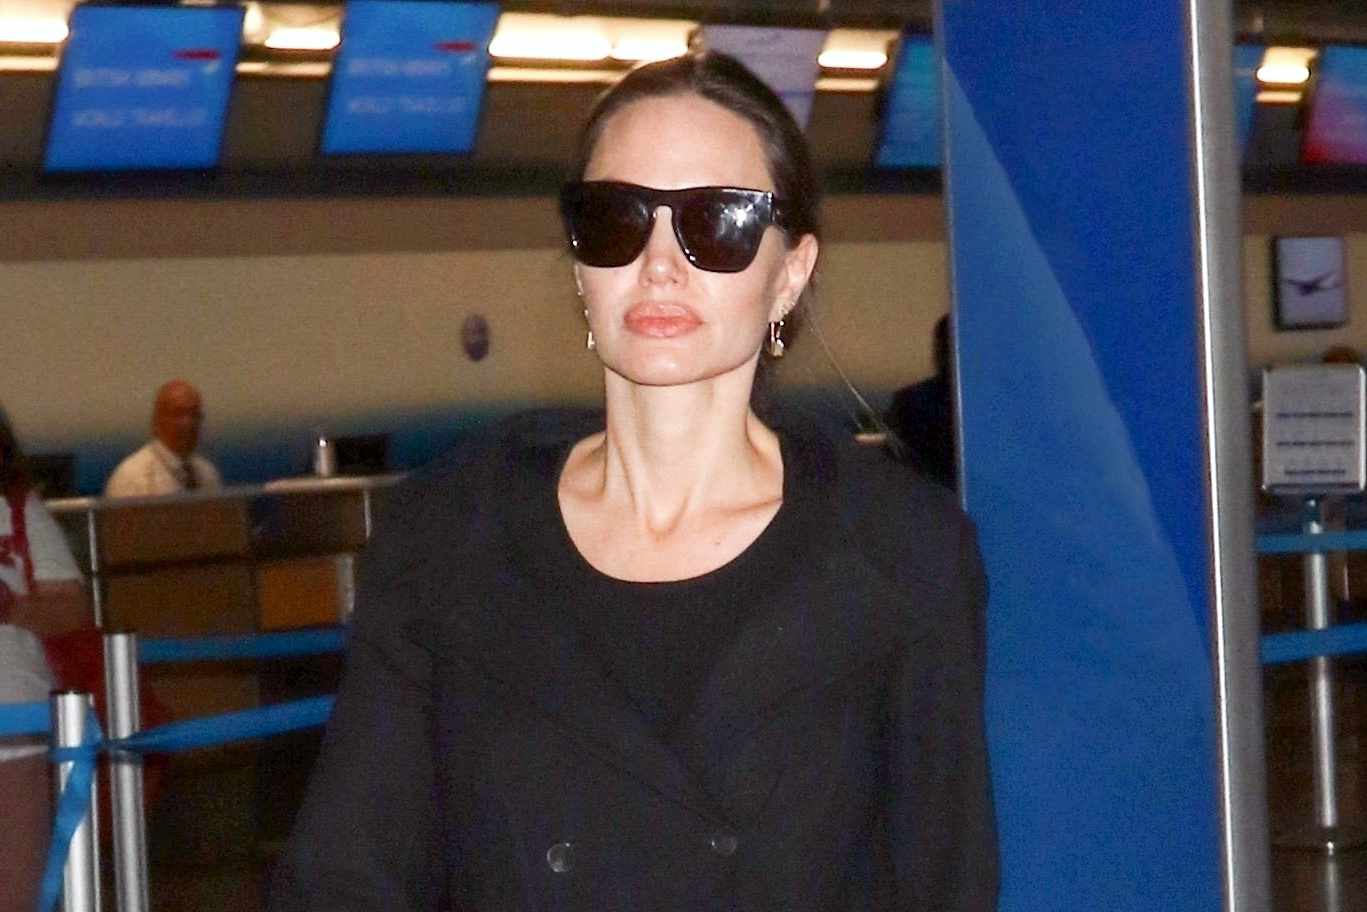 Angelina Jolie Wore a Controversial Airport Outfit